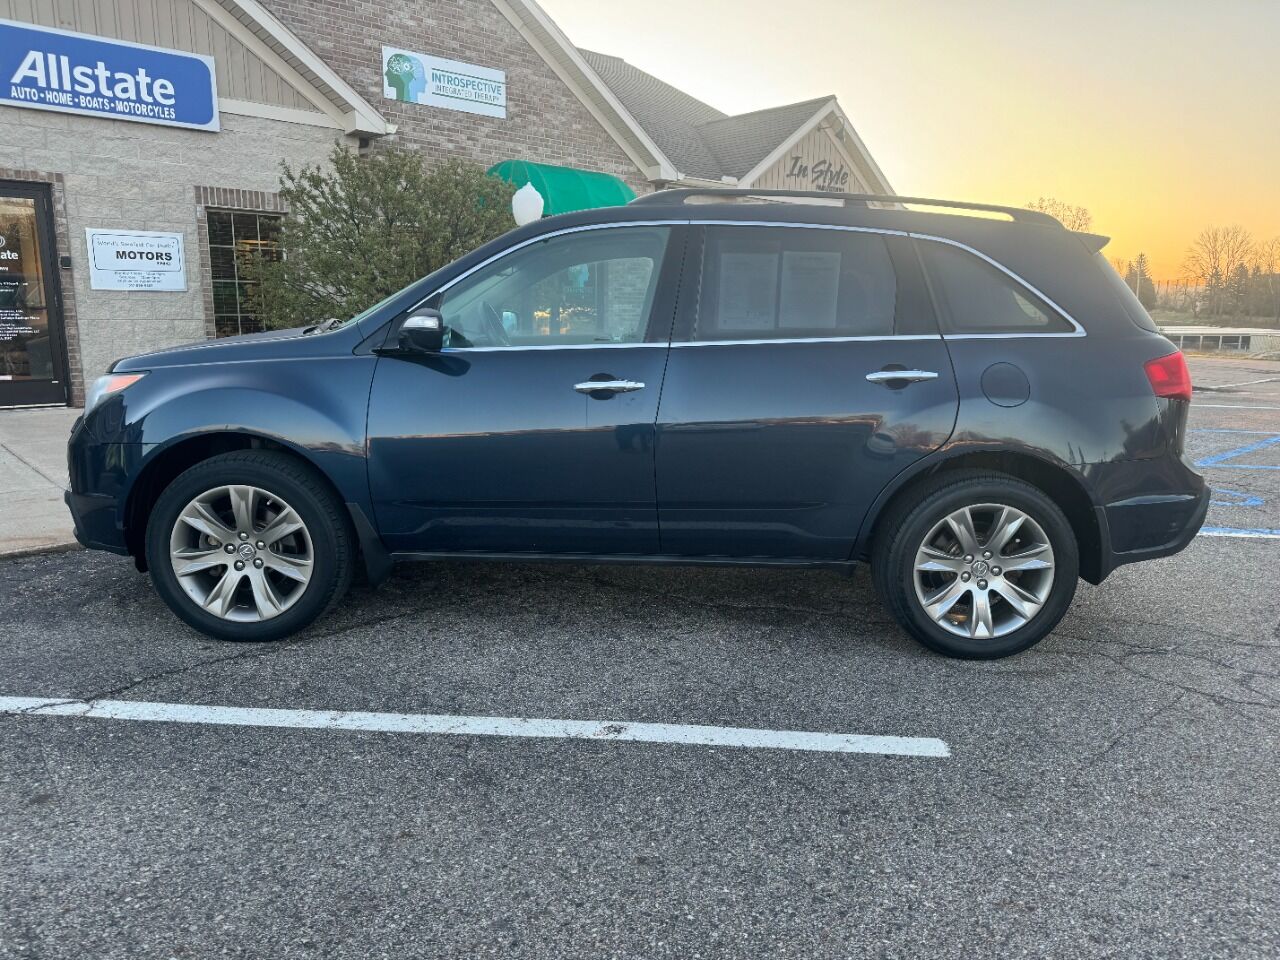 2012 Acura MDX SH-AWD with Advance and Entertainment Package